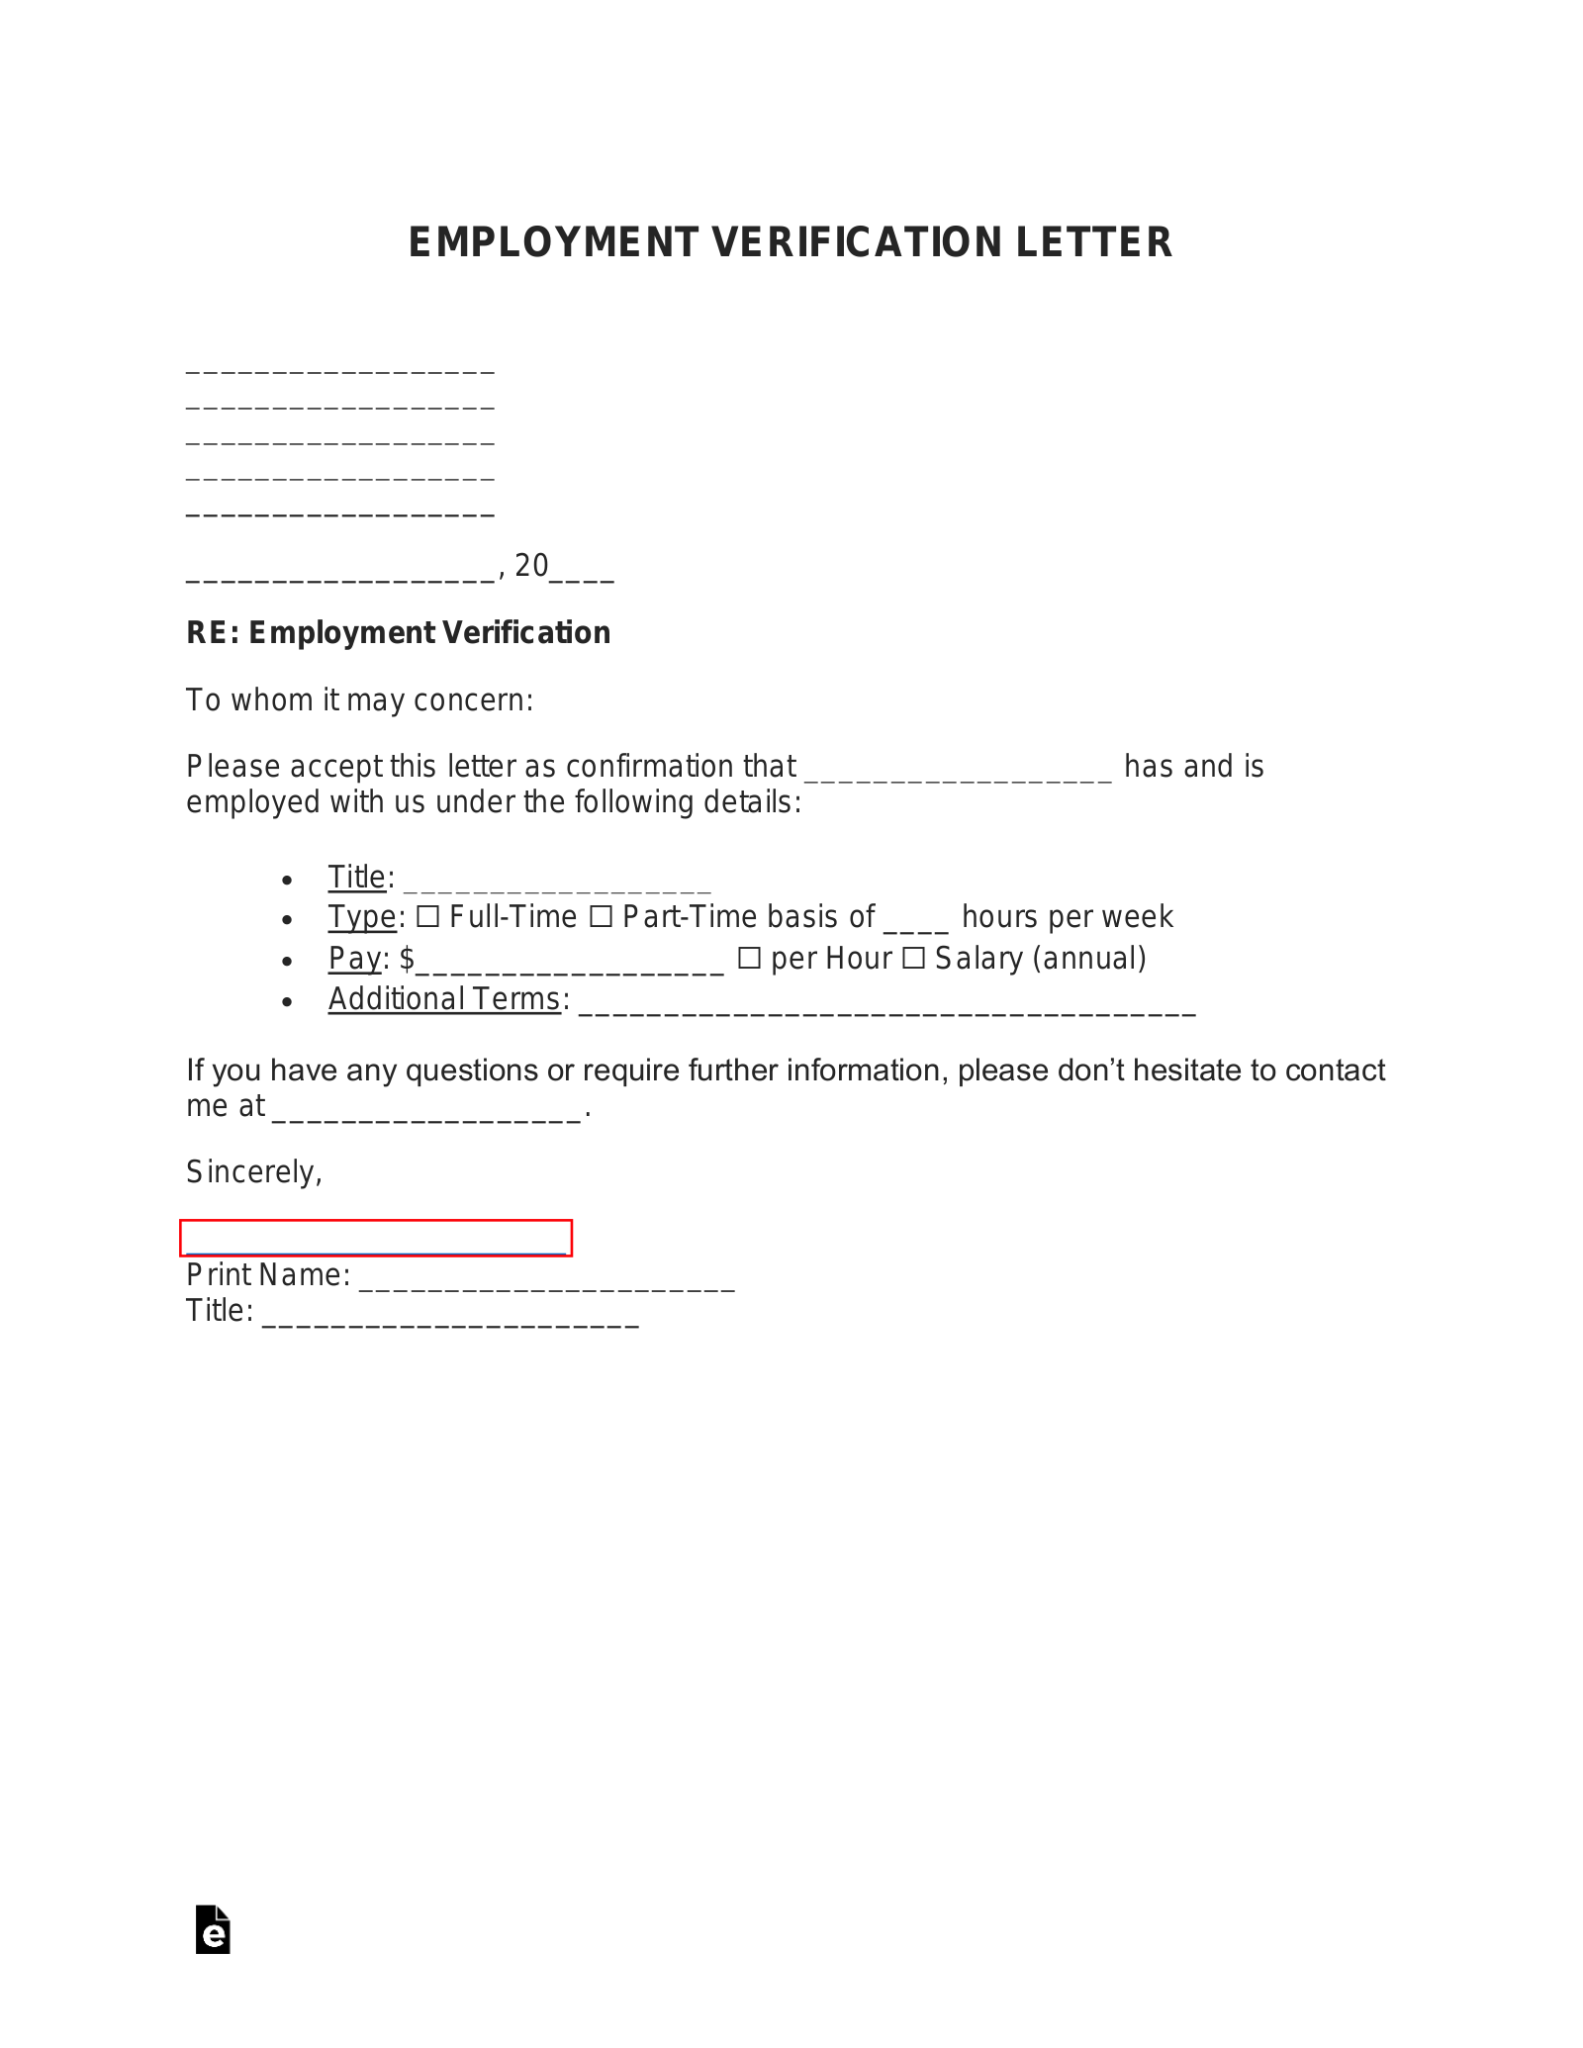 Free Employment (Income) Verification Letter - PDF | Word – eForms